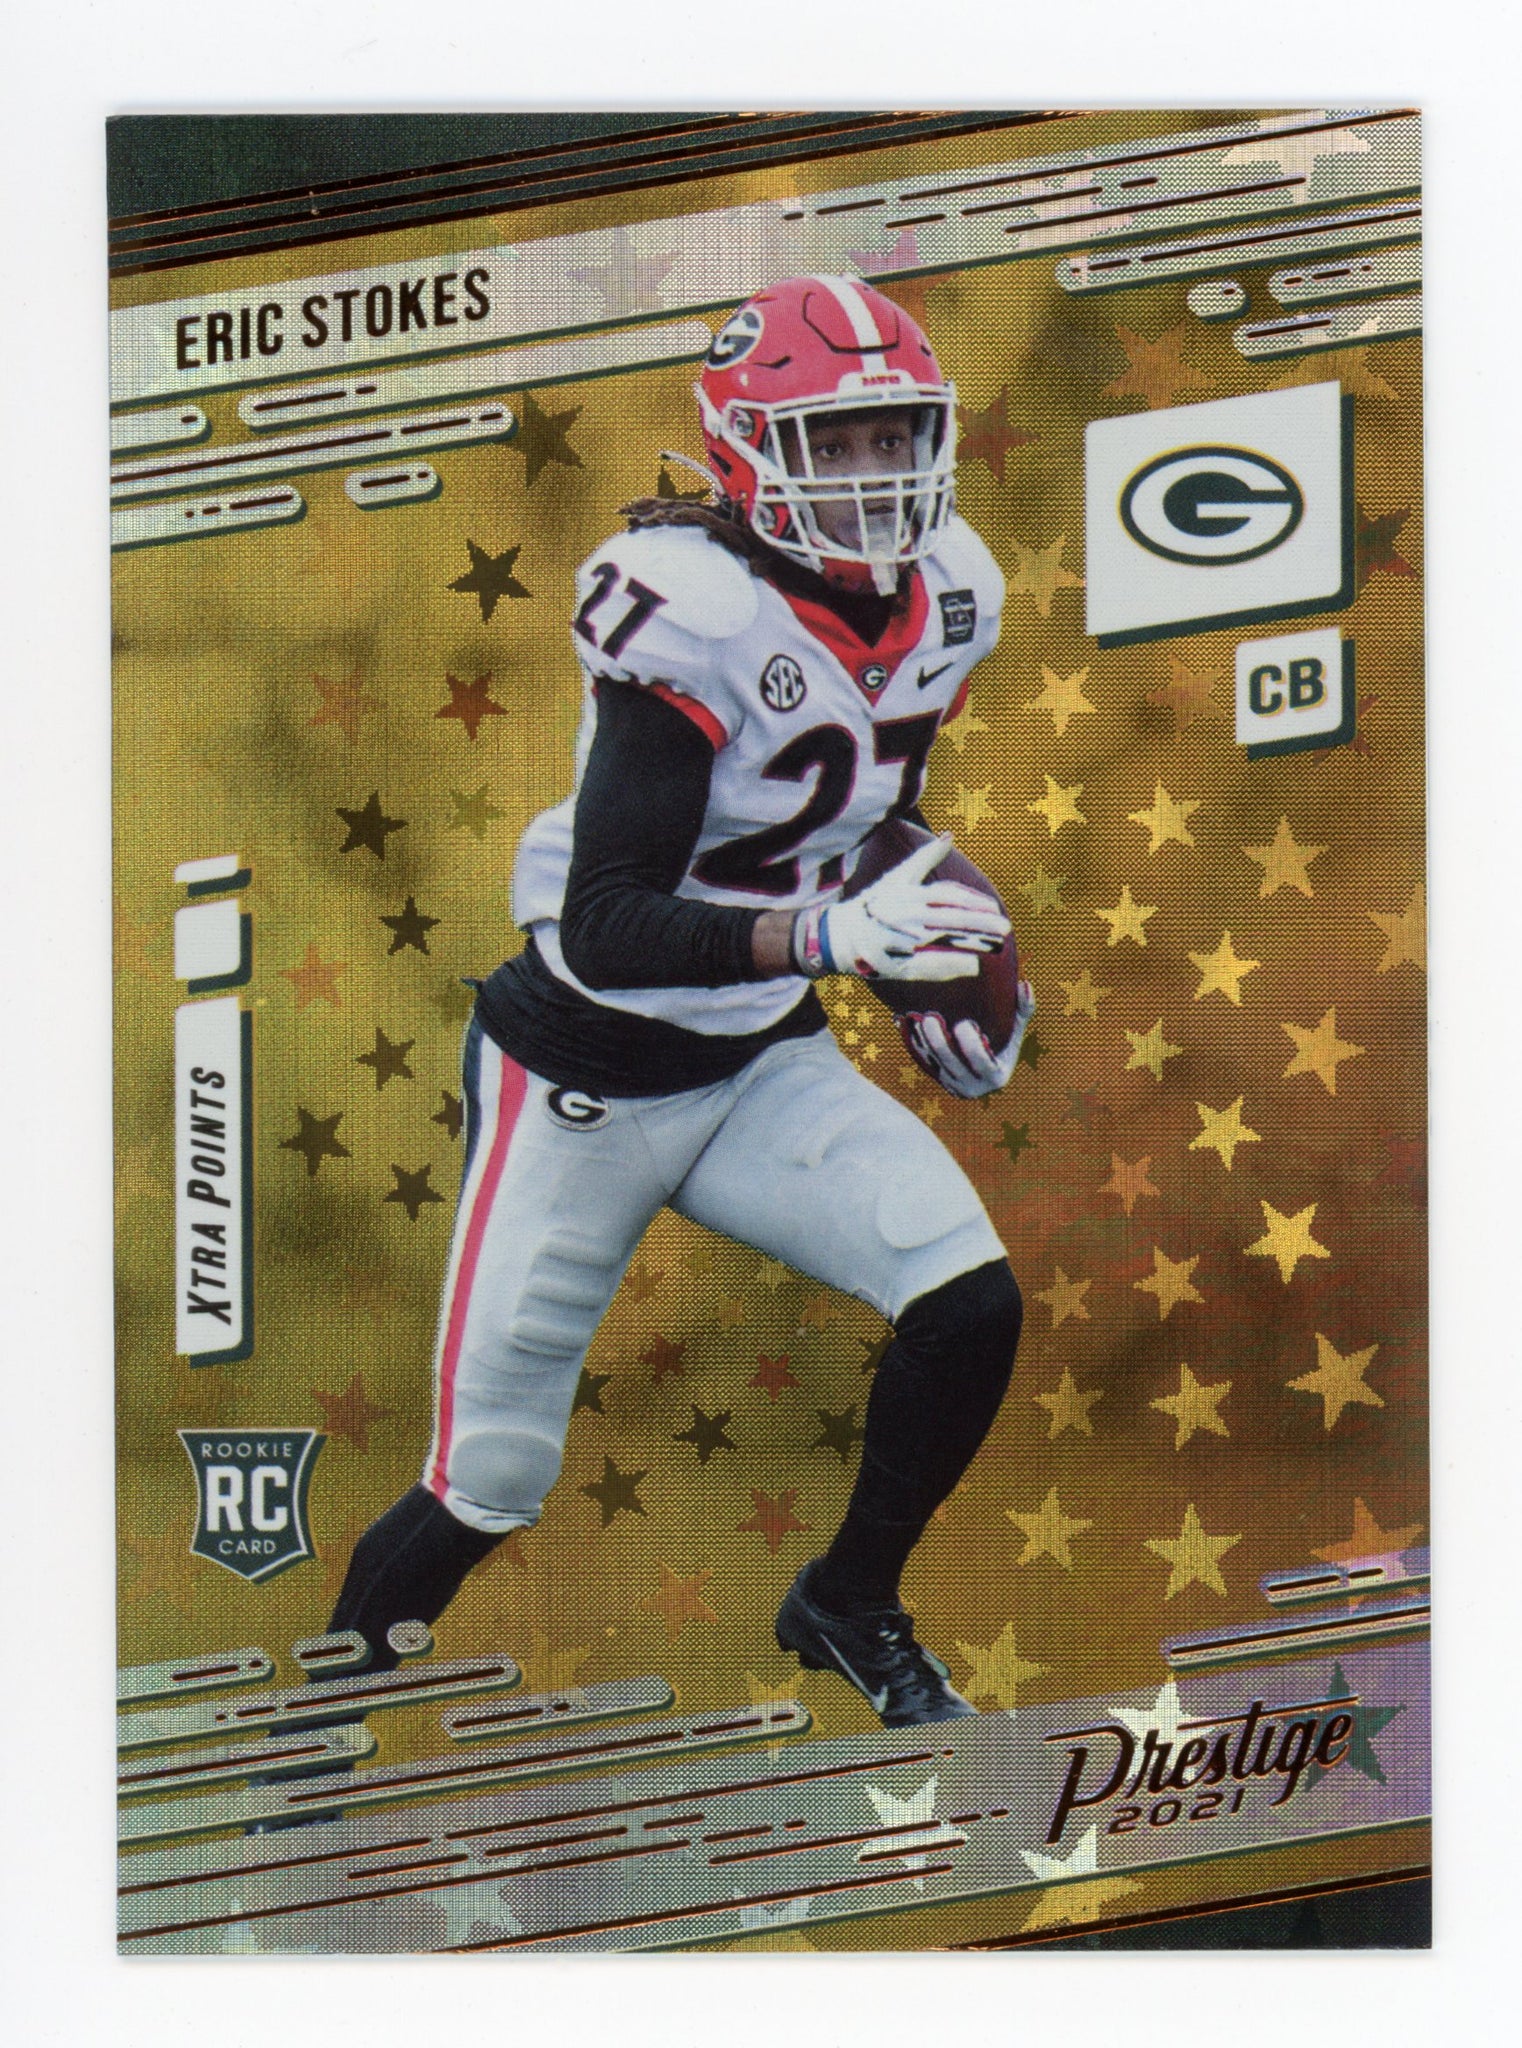 Eric Stokes Panini 2020-2021 Prestige Xtra Points Rookie Green Bay Packers #265